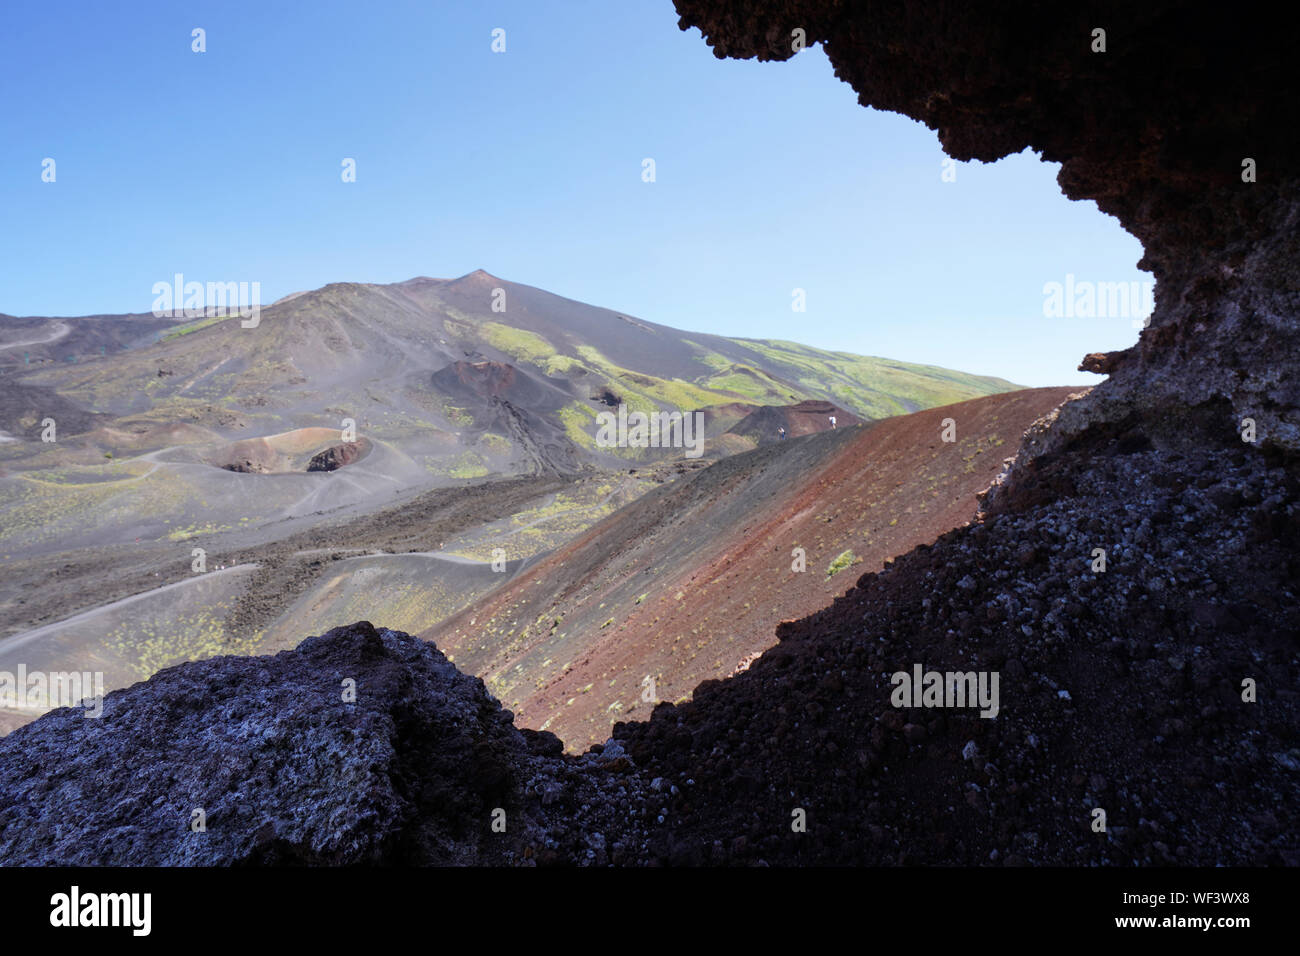 View of Mt. Etna, the largest active volcano in Europe, Sicily, Italy Stock Photo